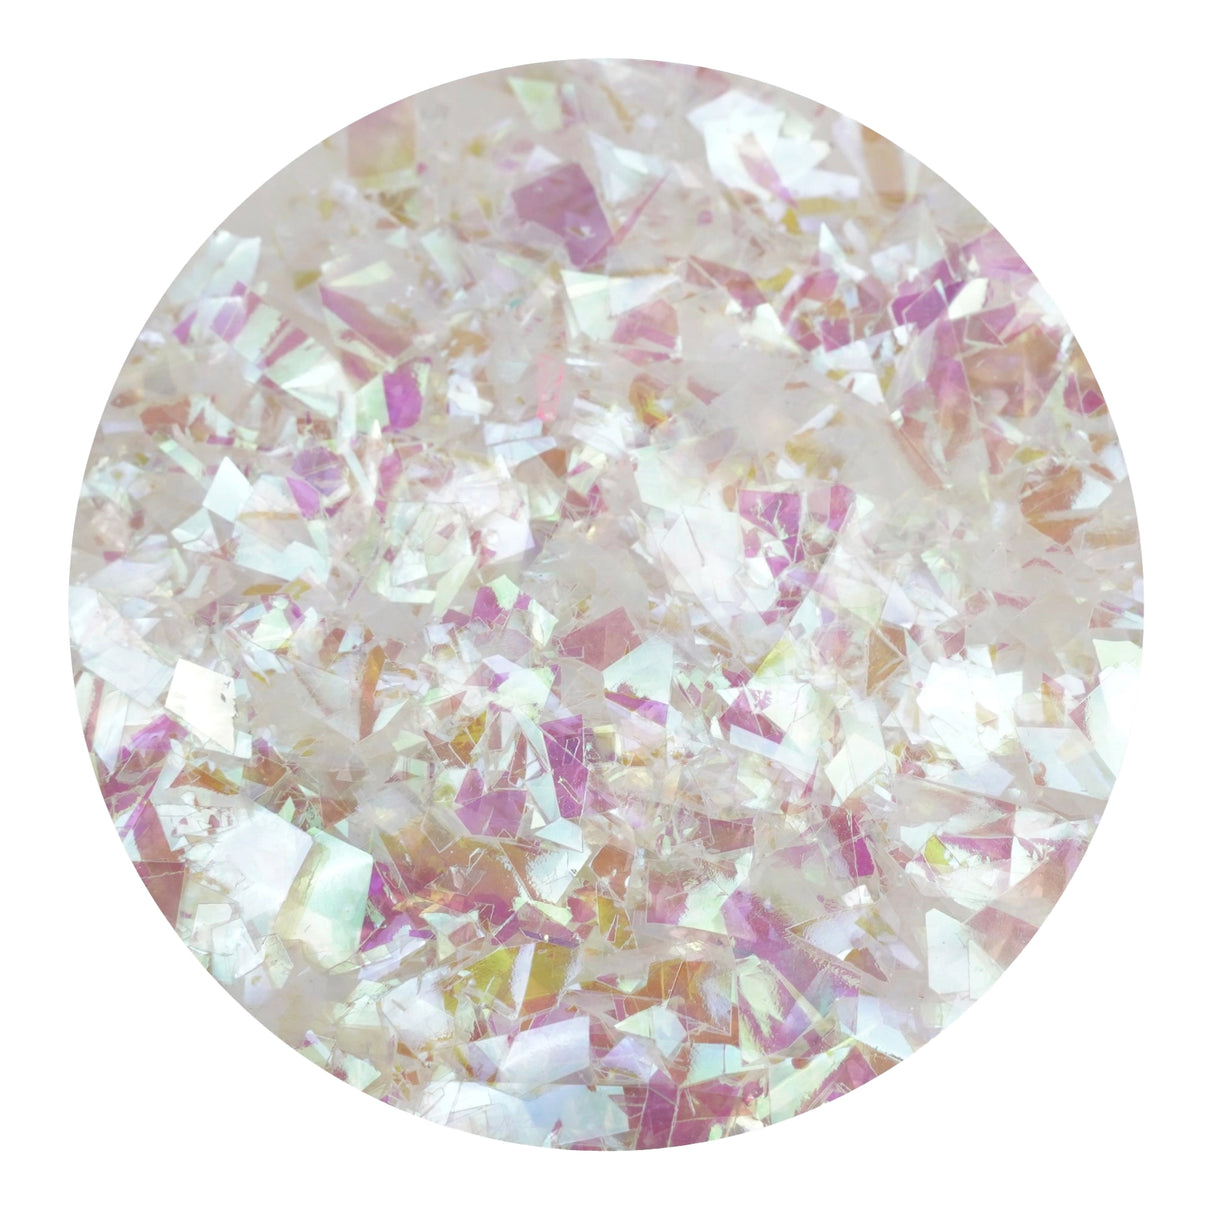 Iridescent Fractured Flakes - White